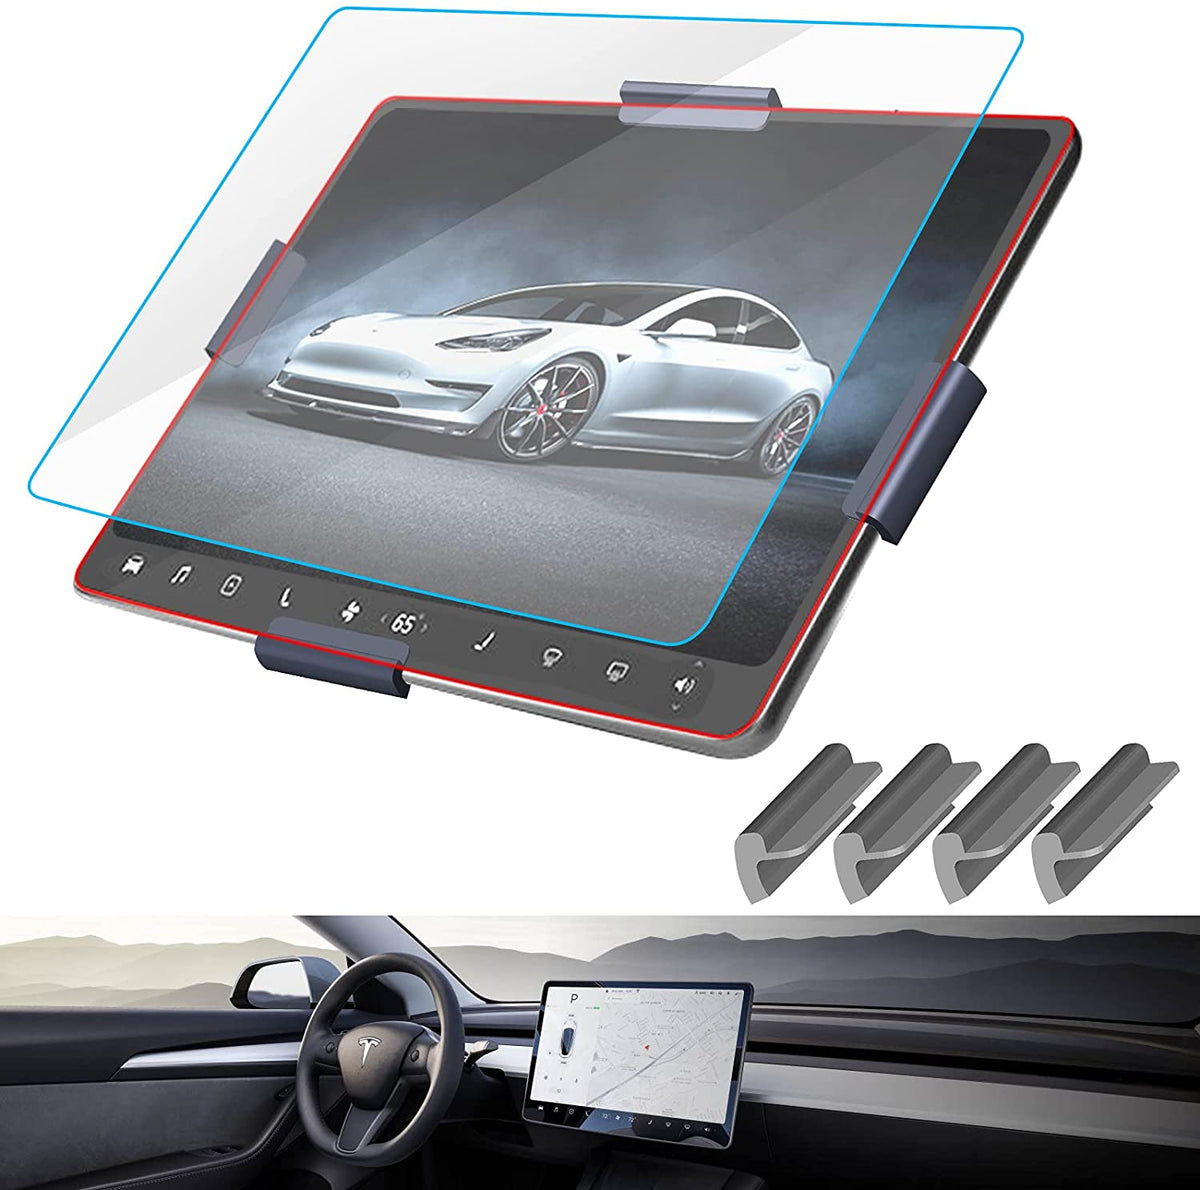 Model 3 Center Control Touch Screen Car Navigation Tempered Glass Screen Protector, 9H